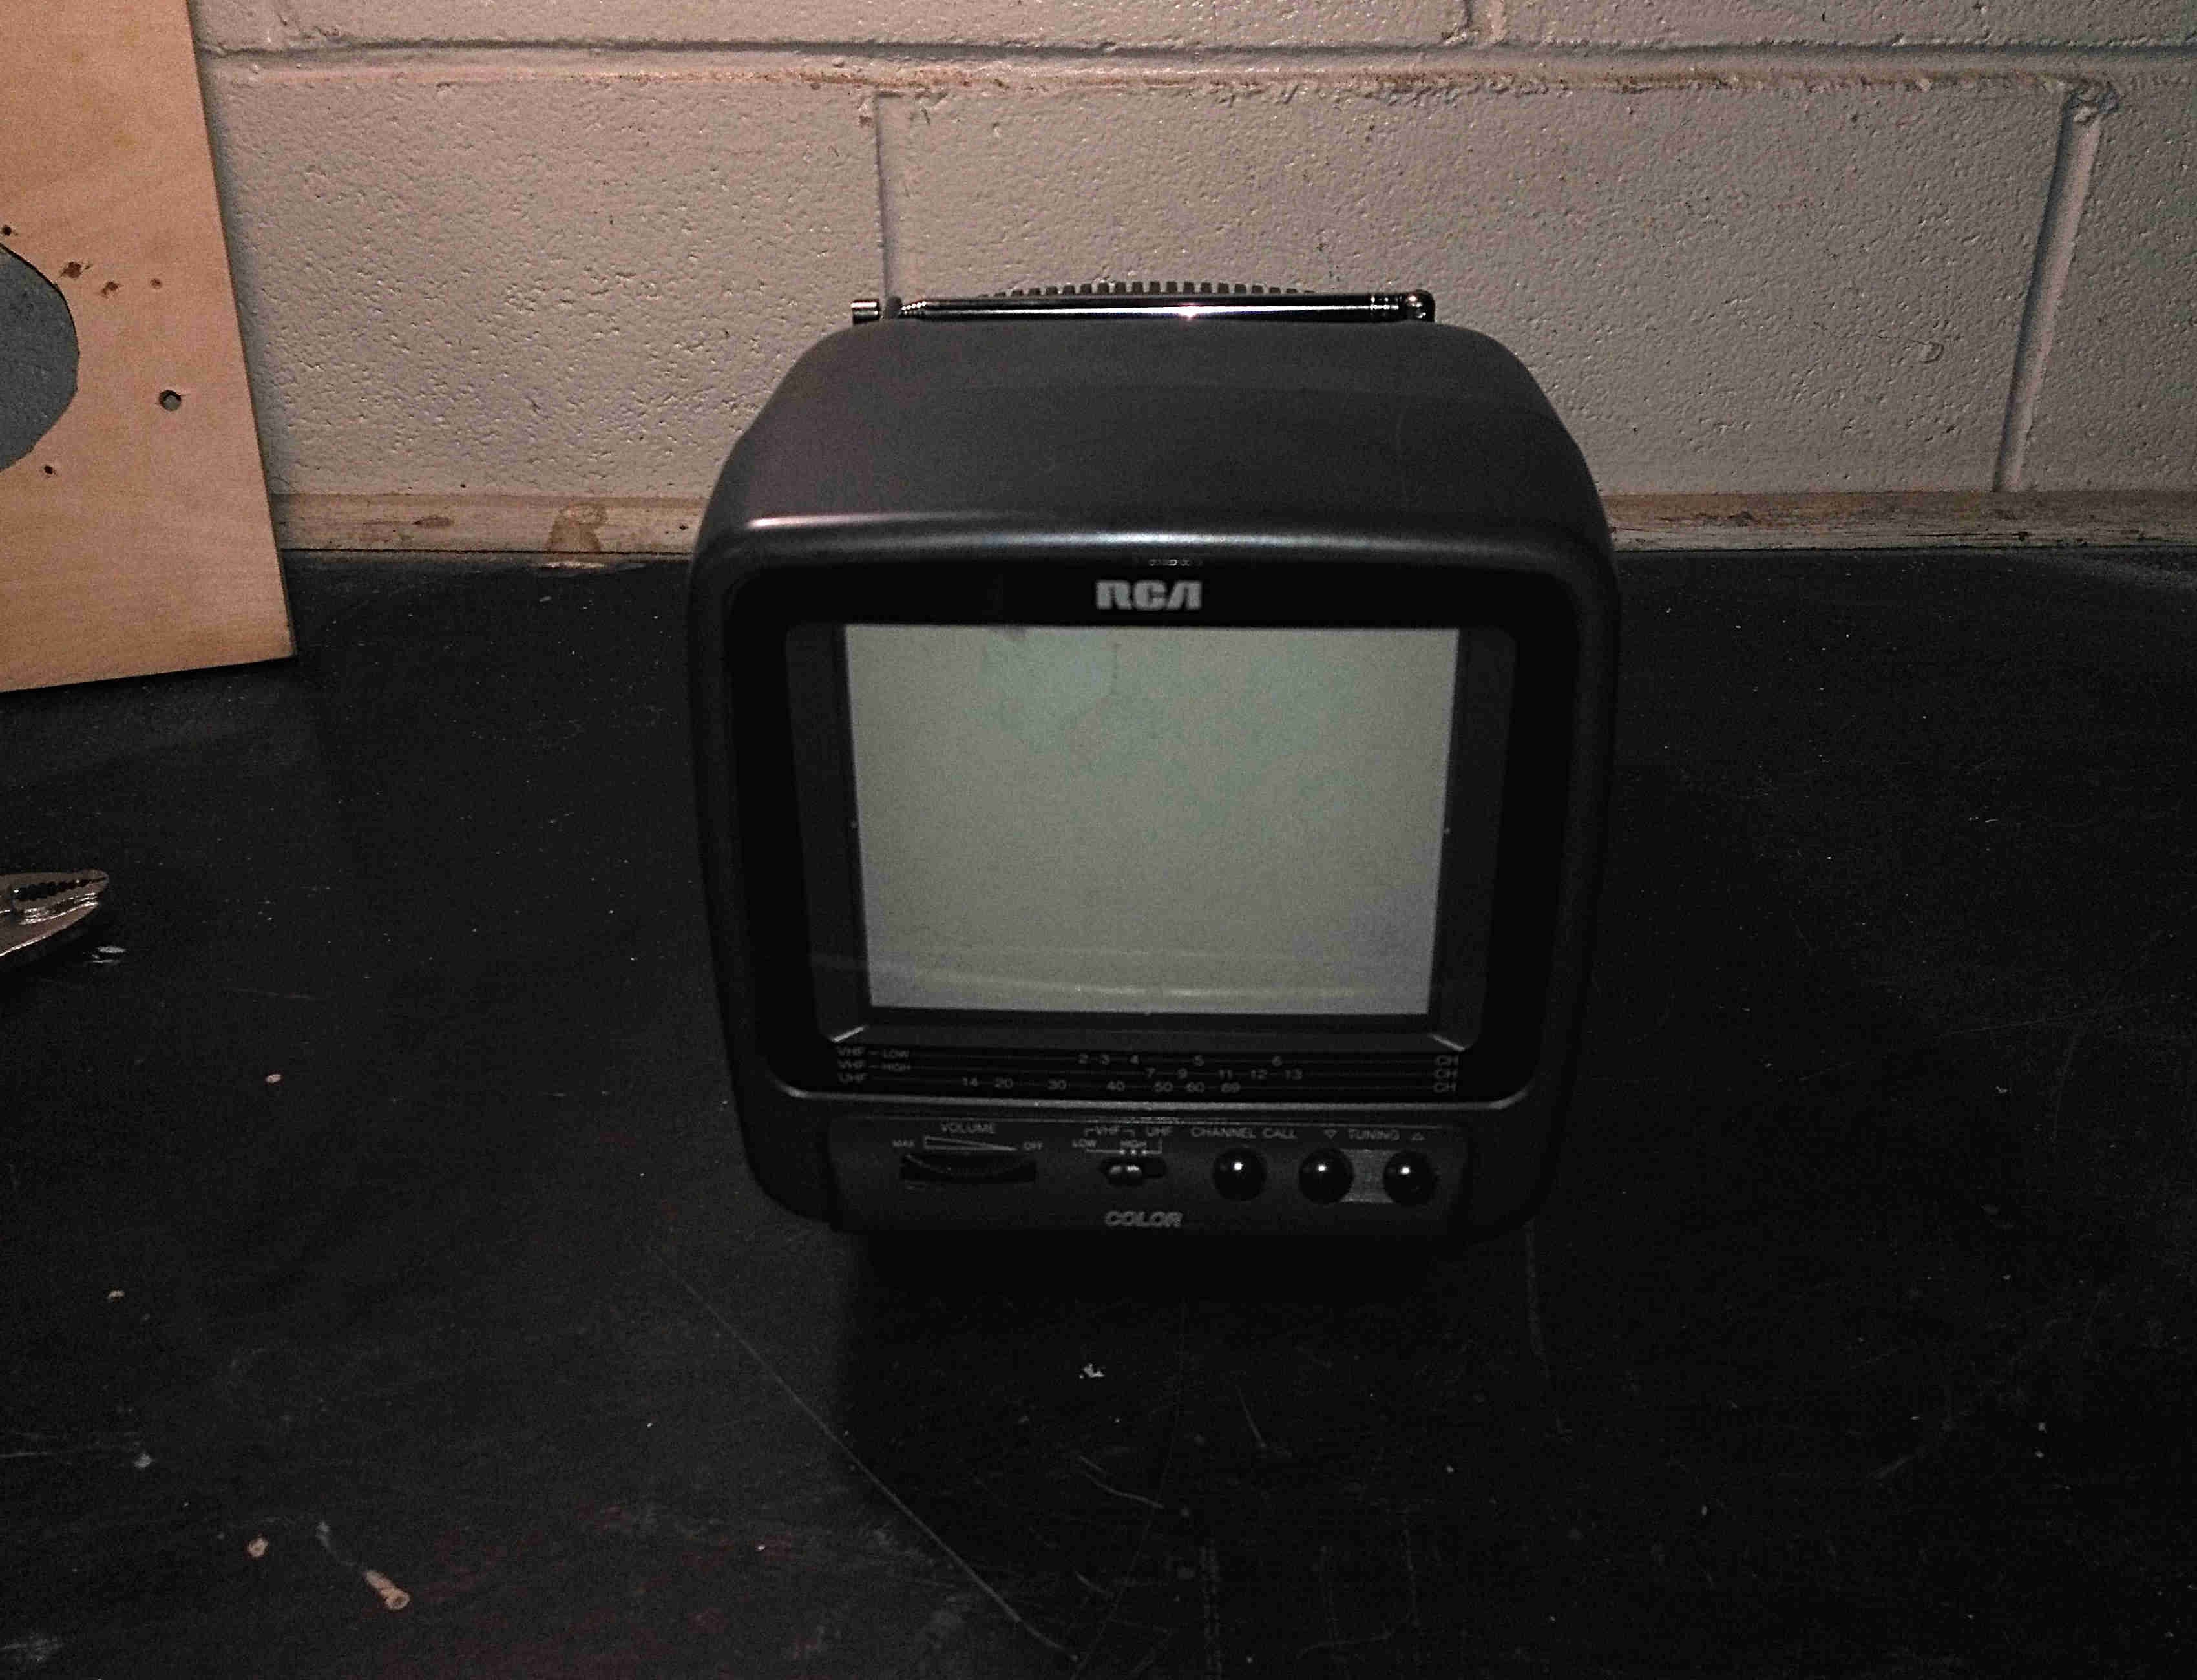 RCA TV front view